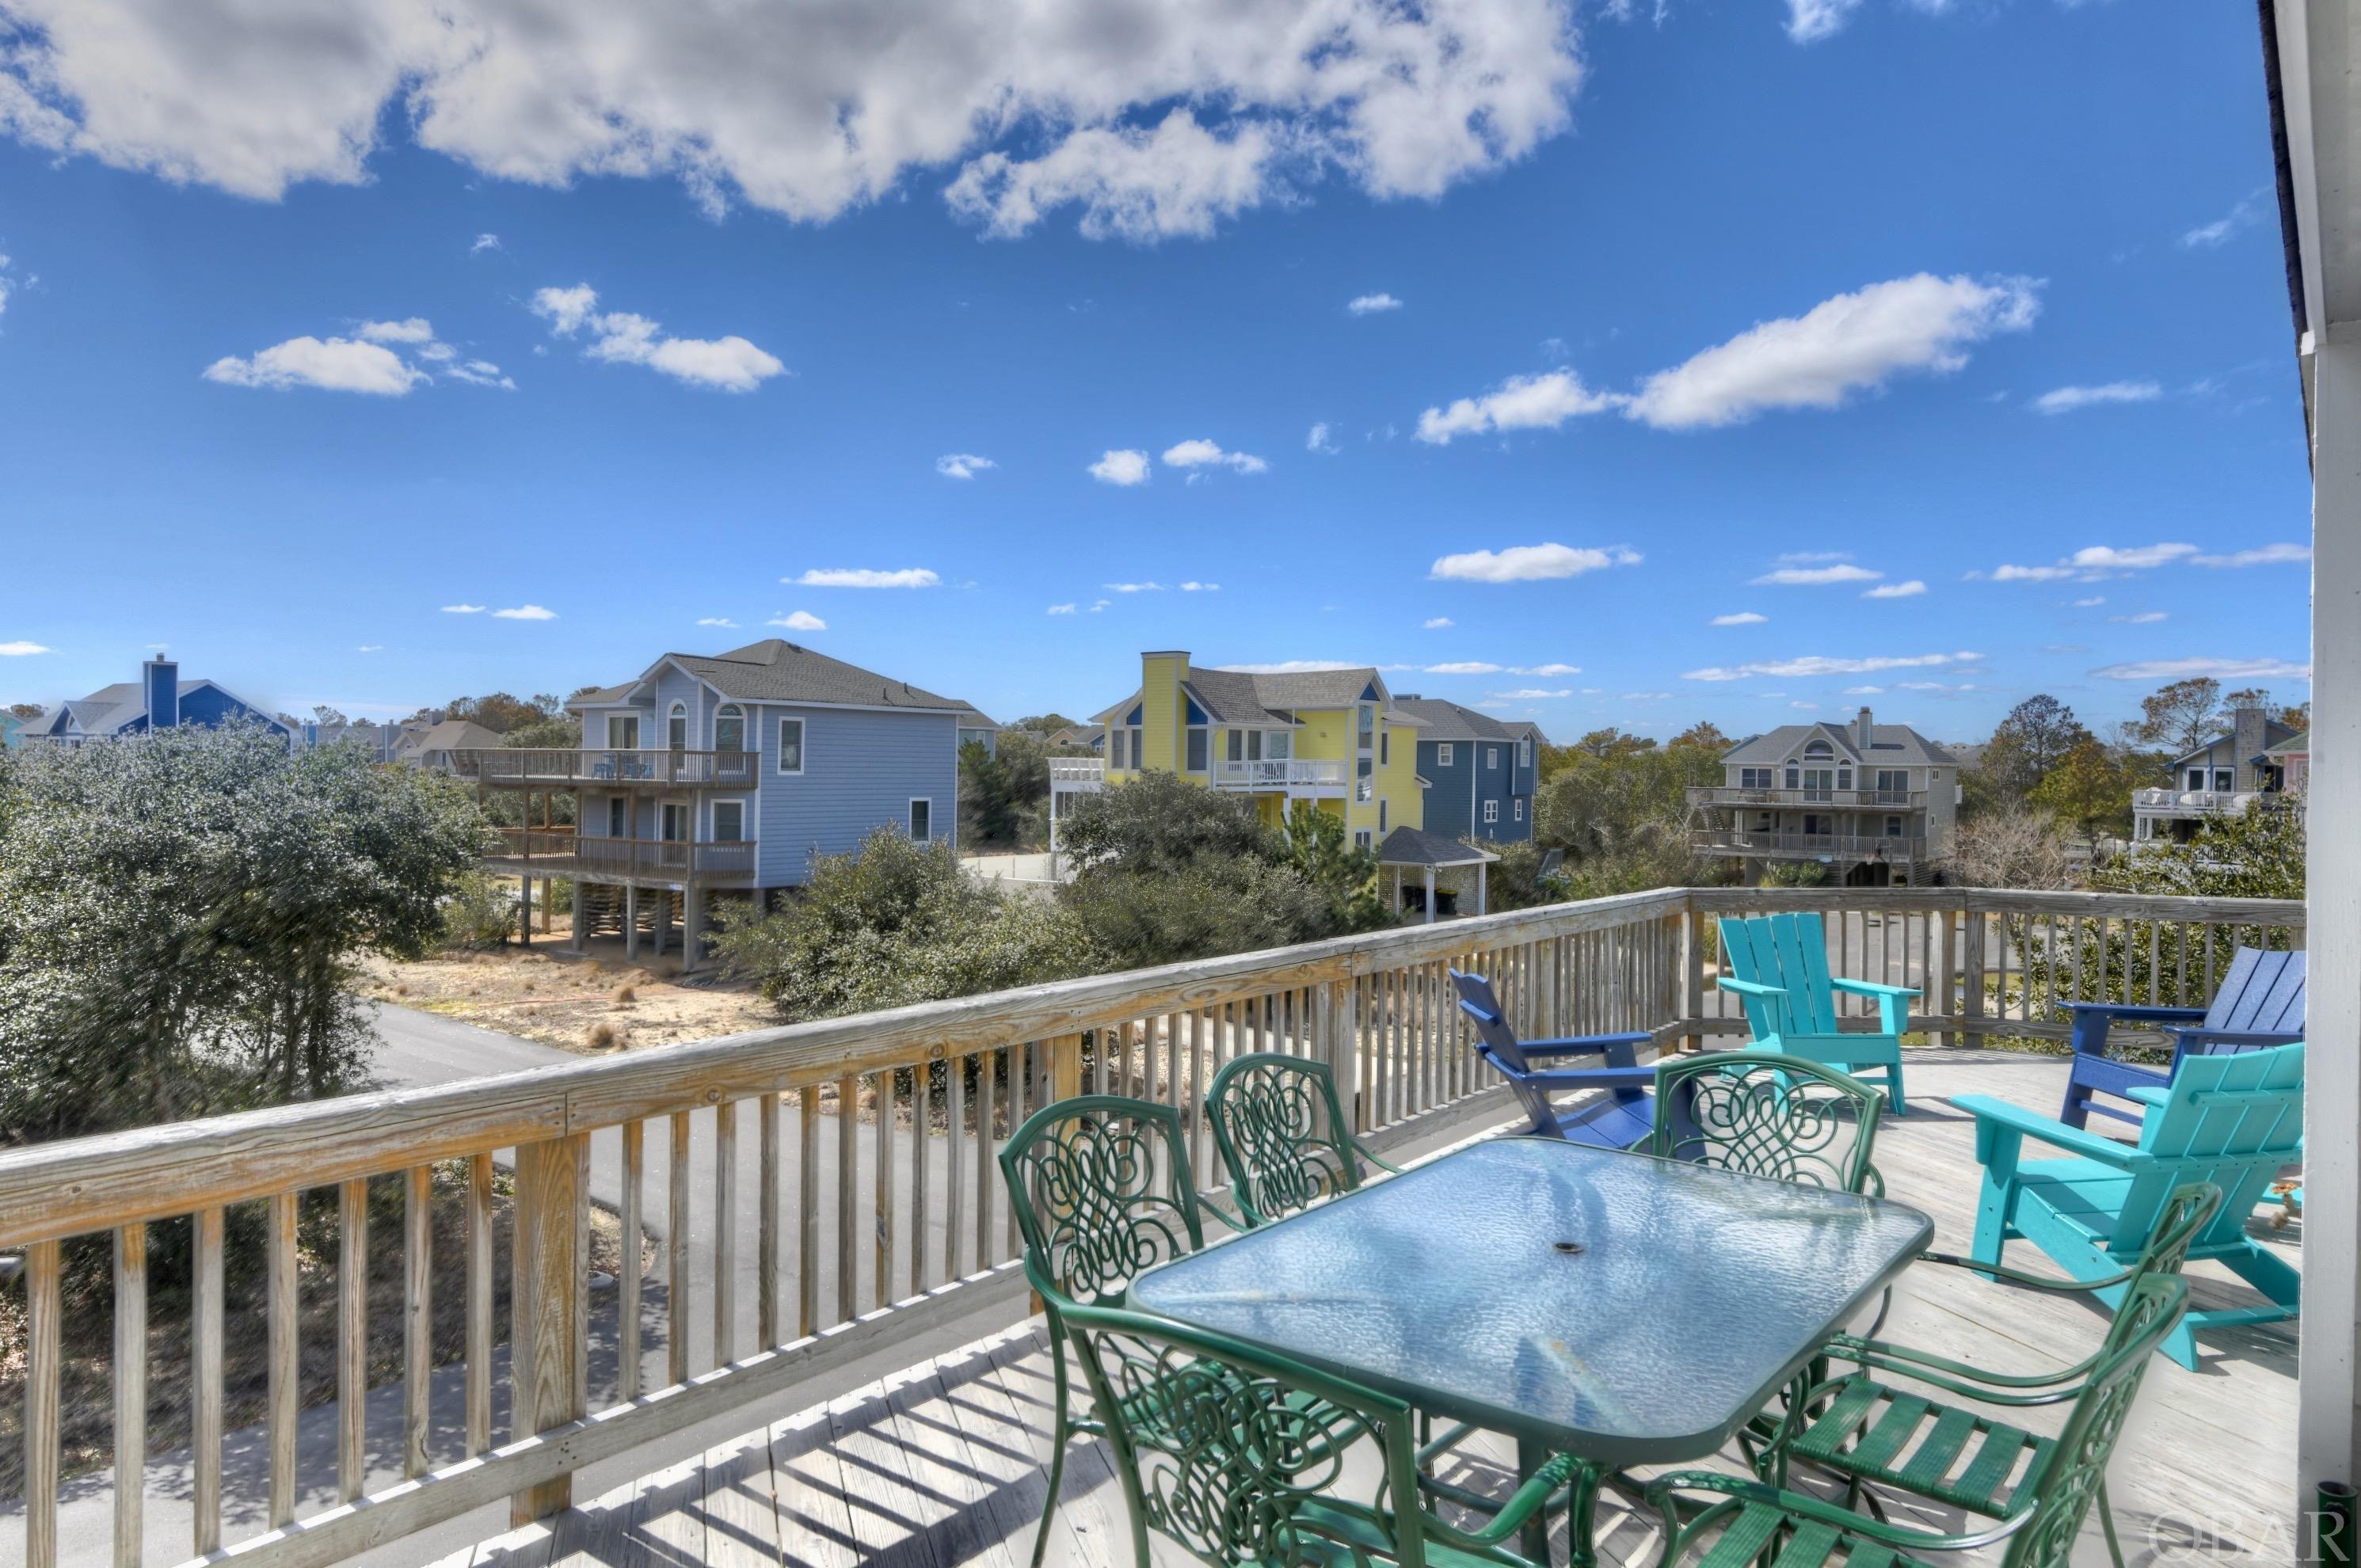 749 Sand Dollar Court, Corolla, NC 27927, 6 Bedrooms Bedrooms, ,4 BathroomsBathrooms,Residential,For sale,Sand Dollar Court,124952